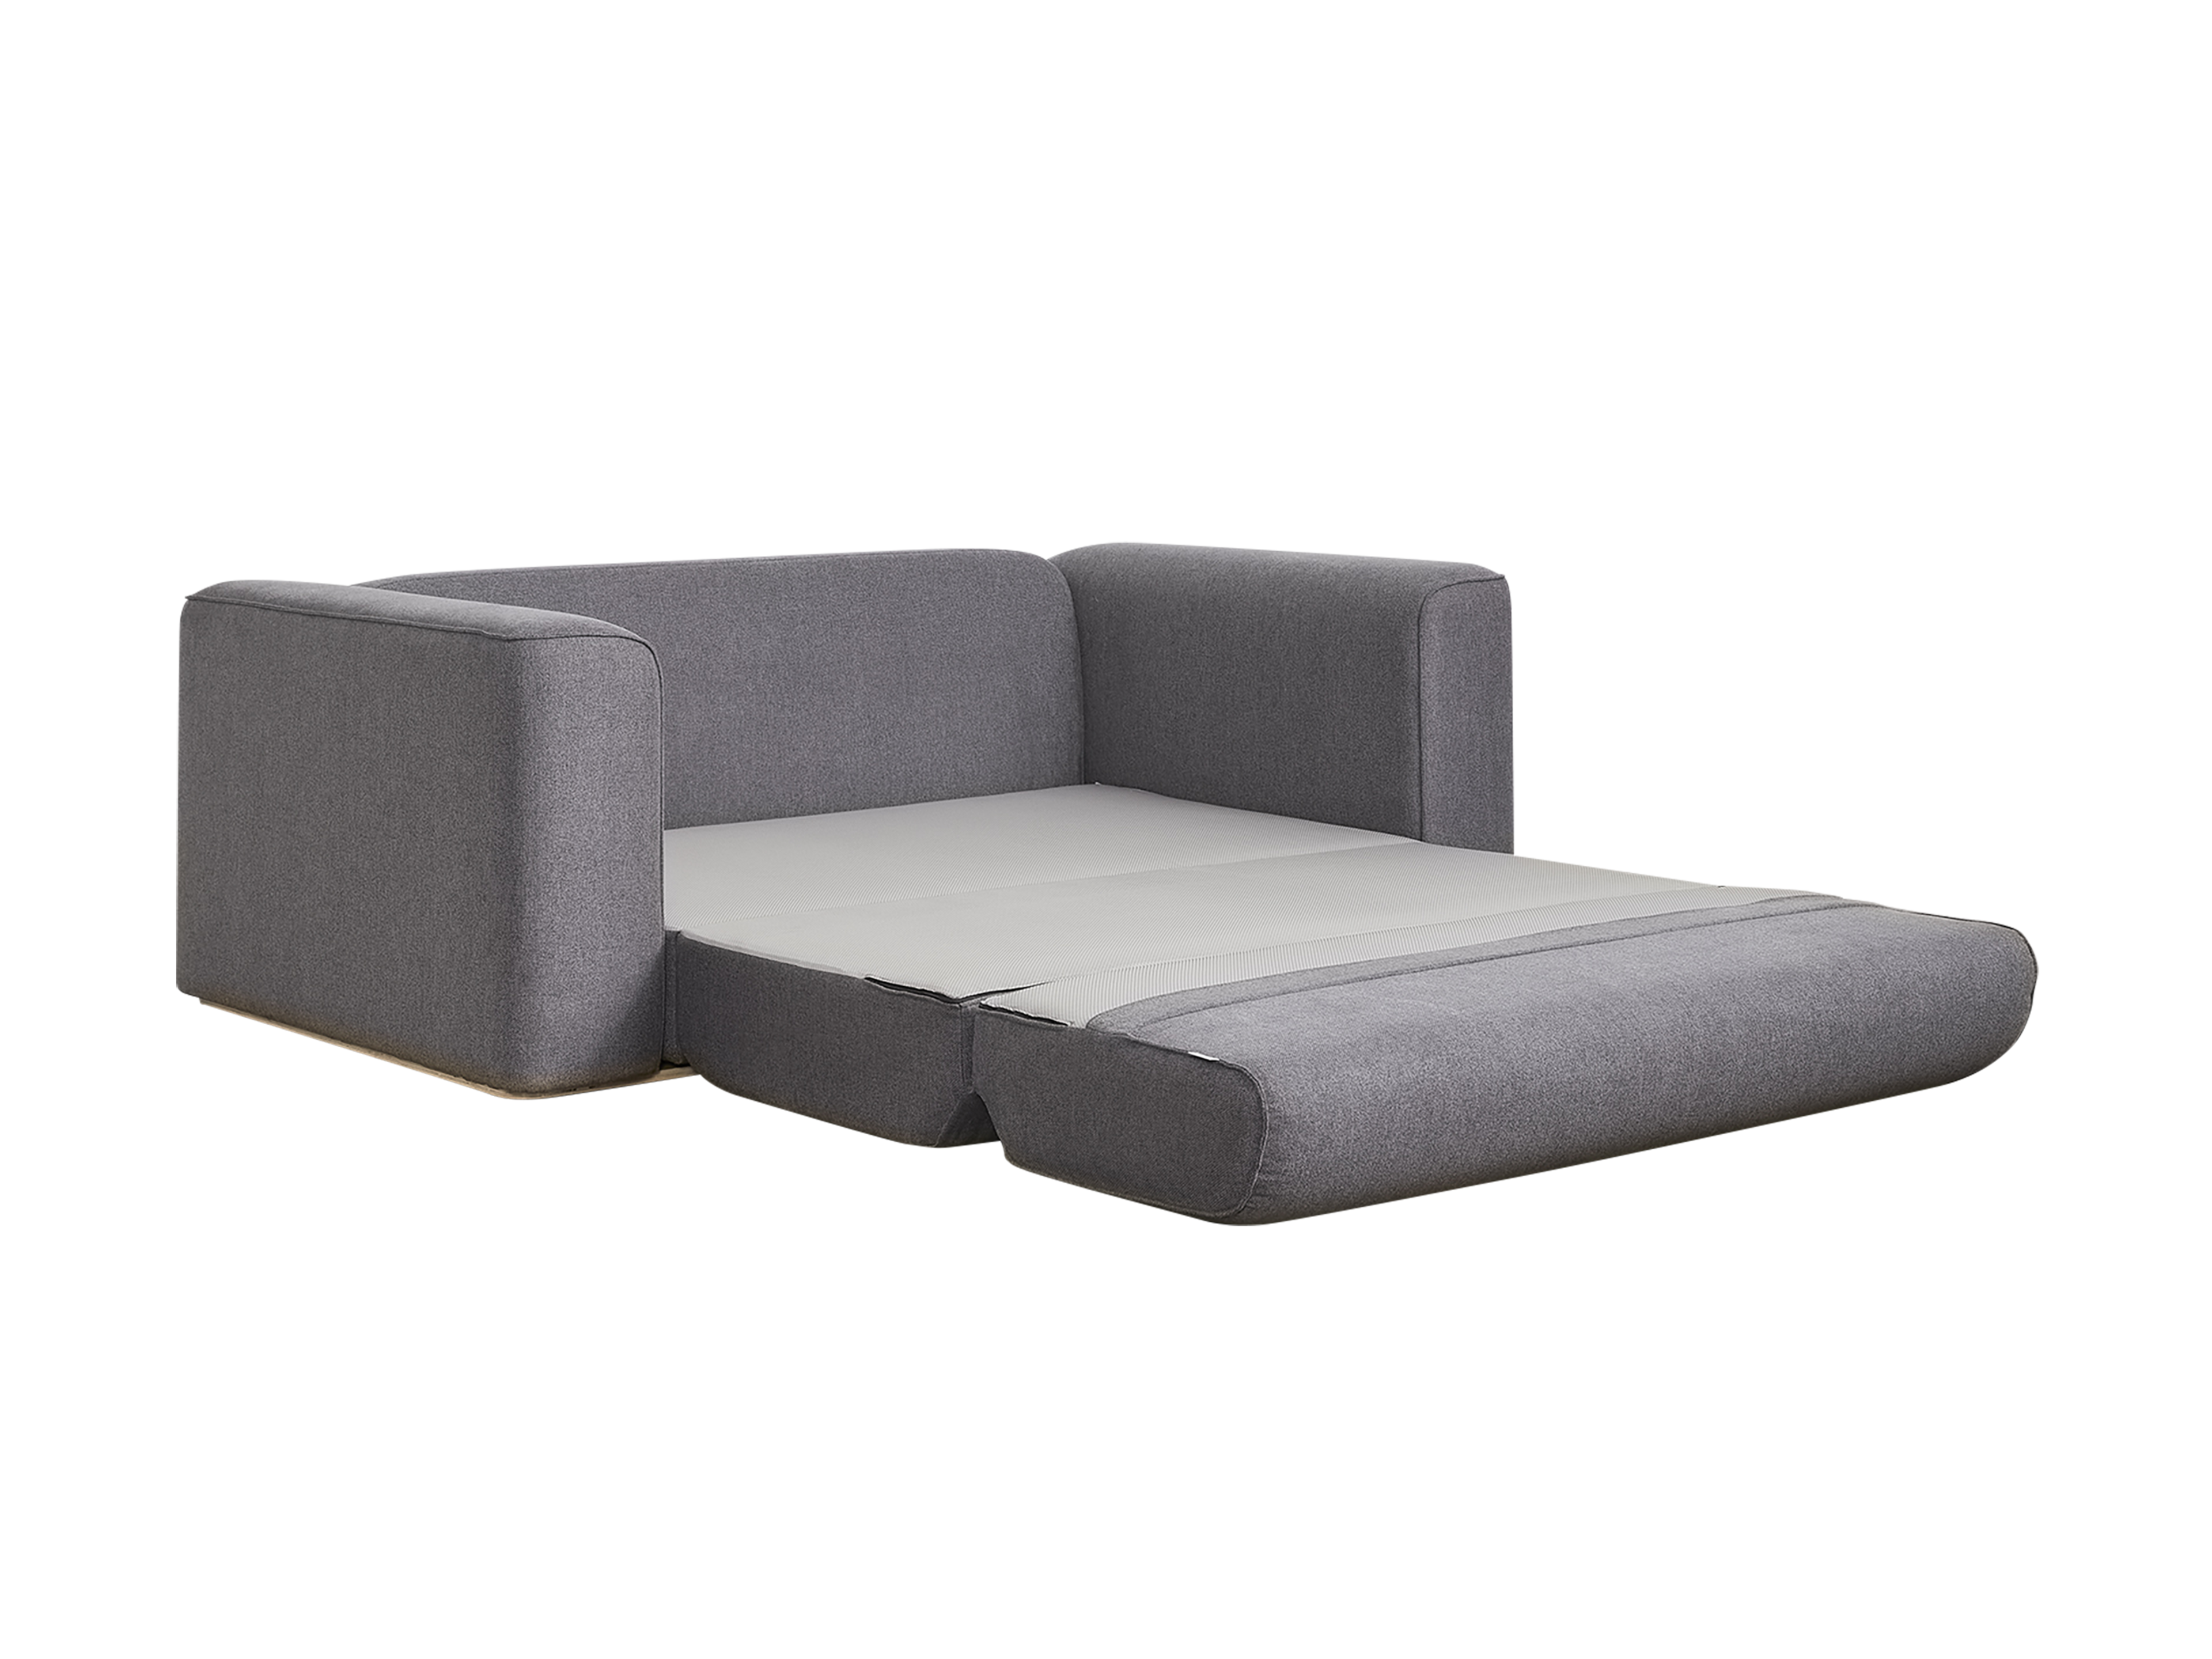 Sofa Bed Queen & Double Slider Trackie Dack Product 3